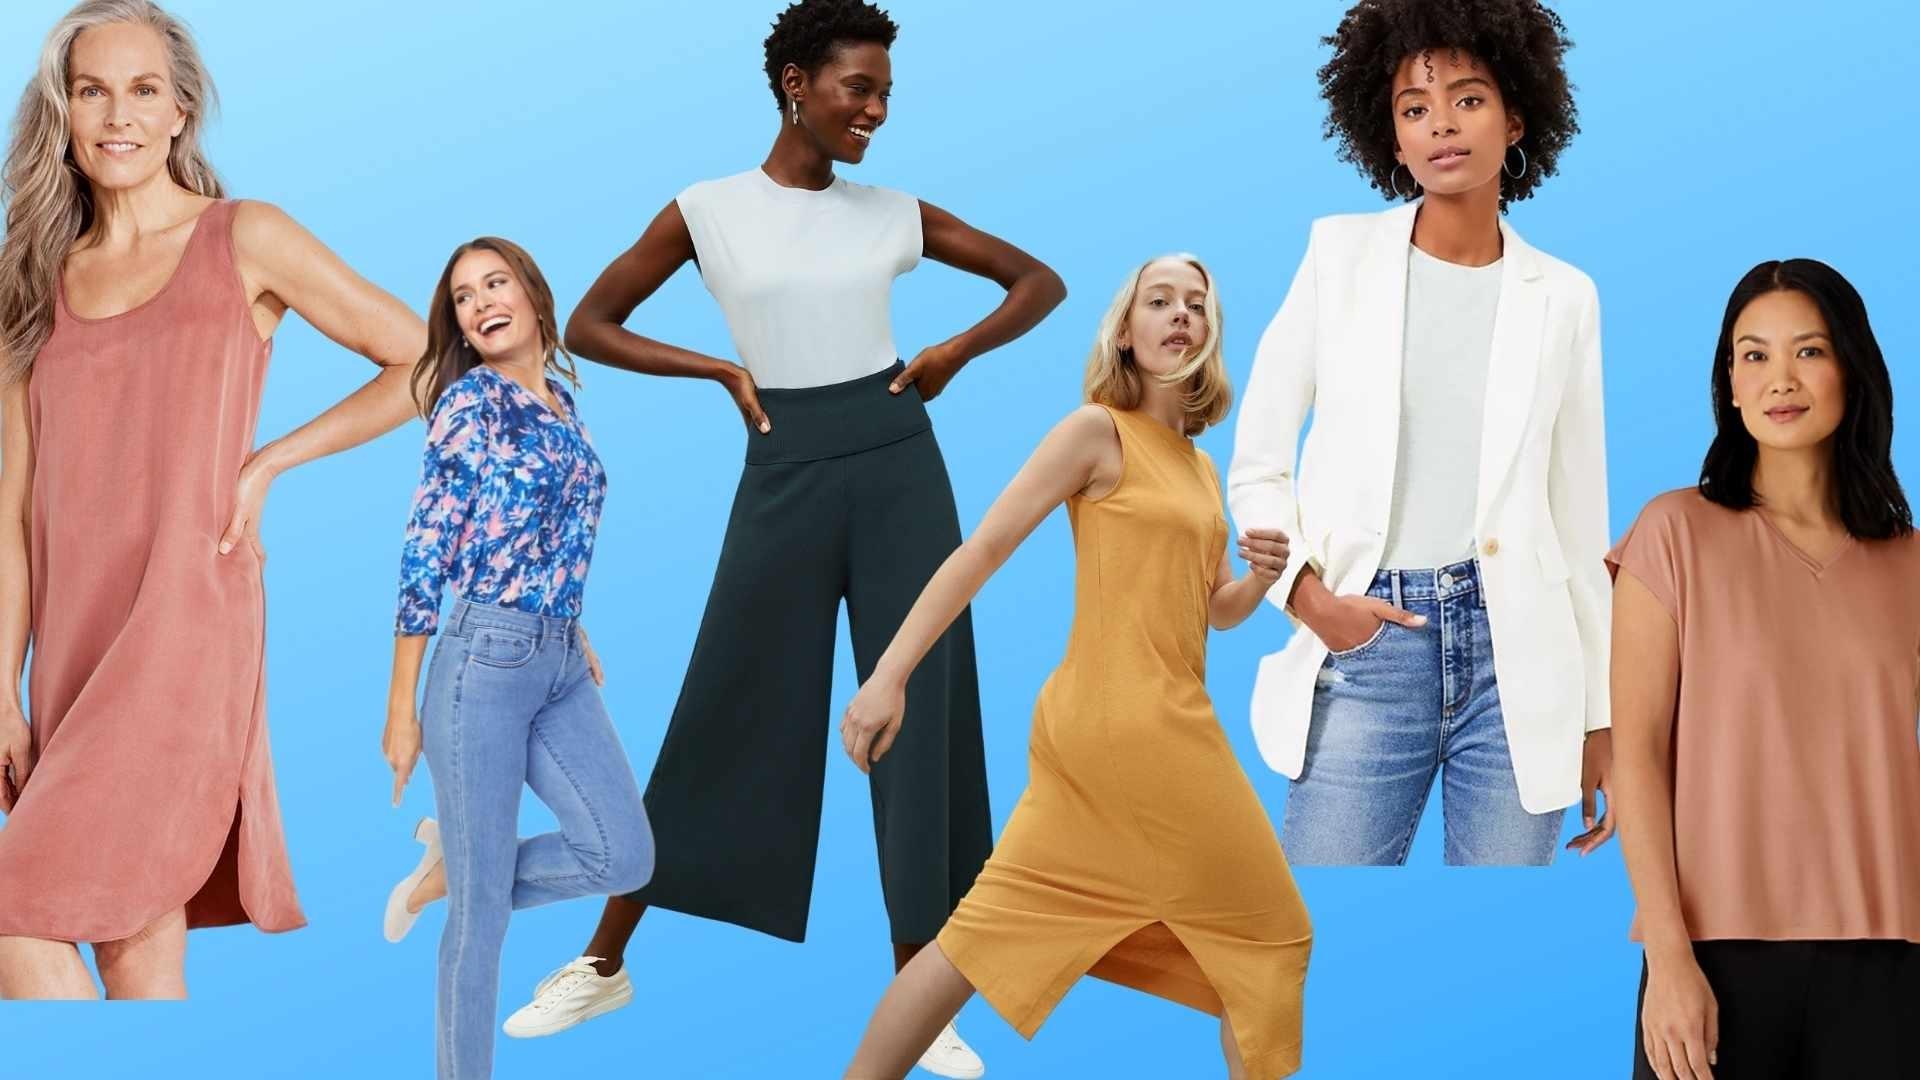 17 Best Clothing Stores for Women Over 50 in 2021 - Woman's World